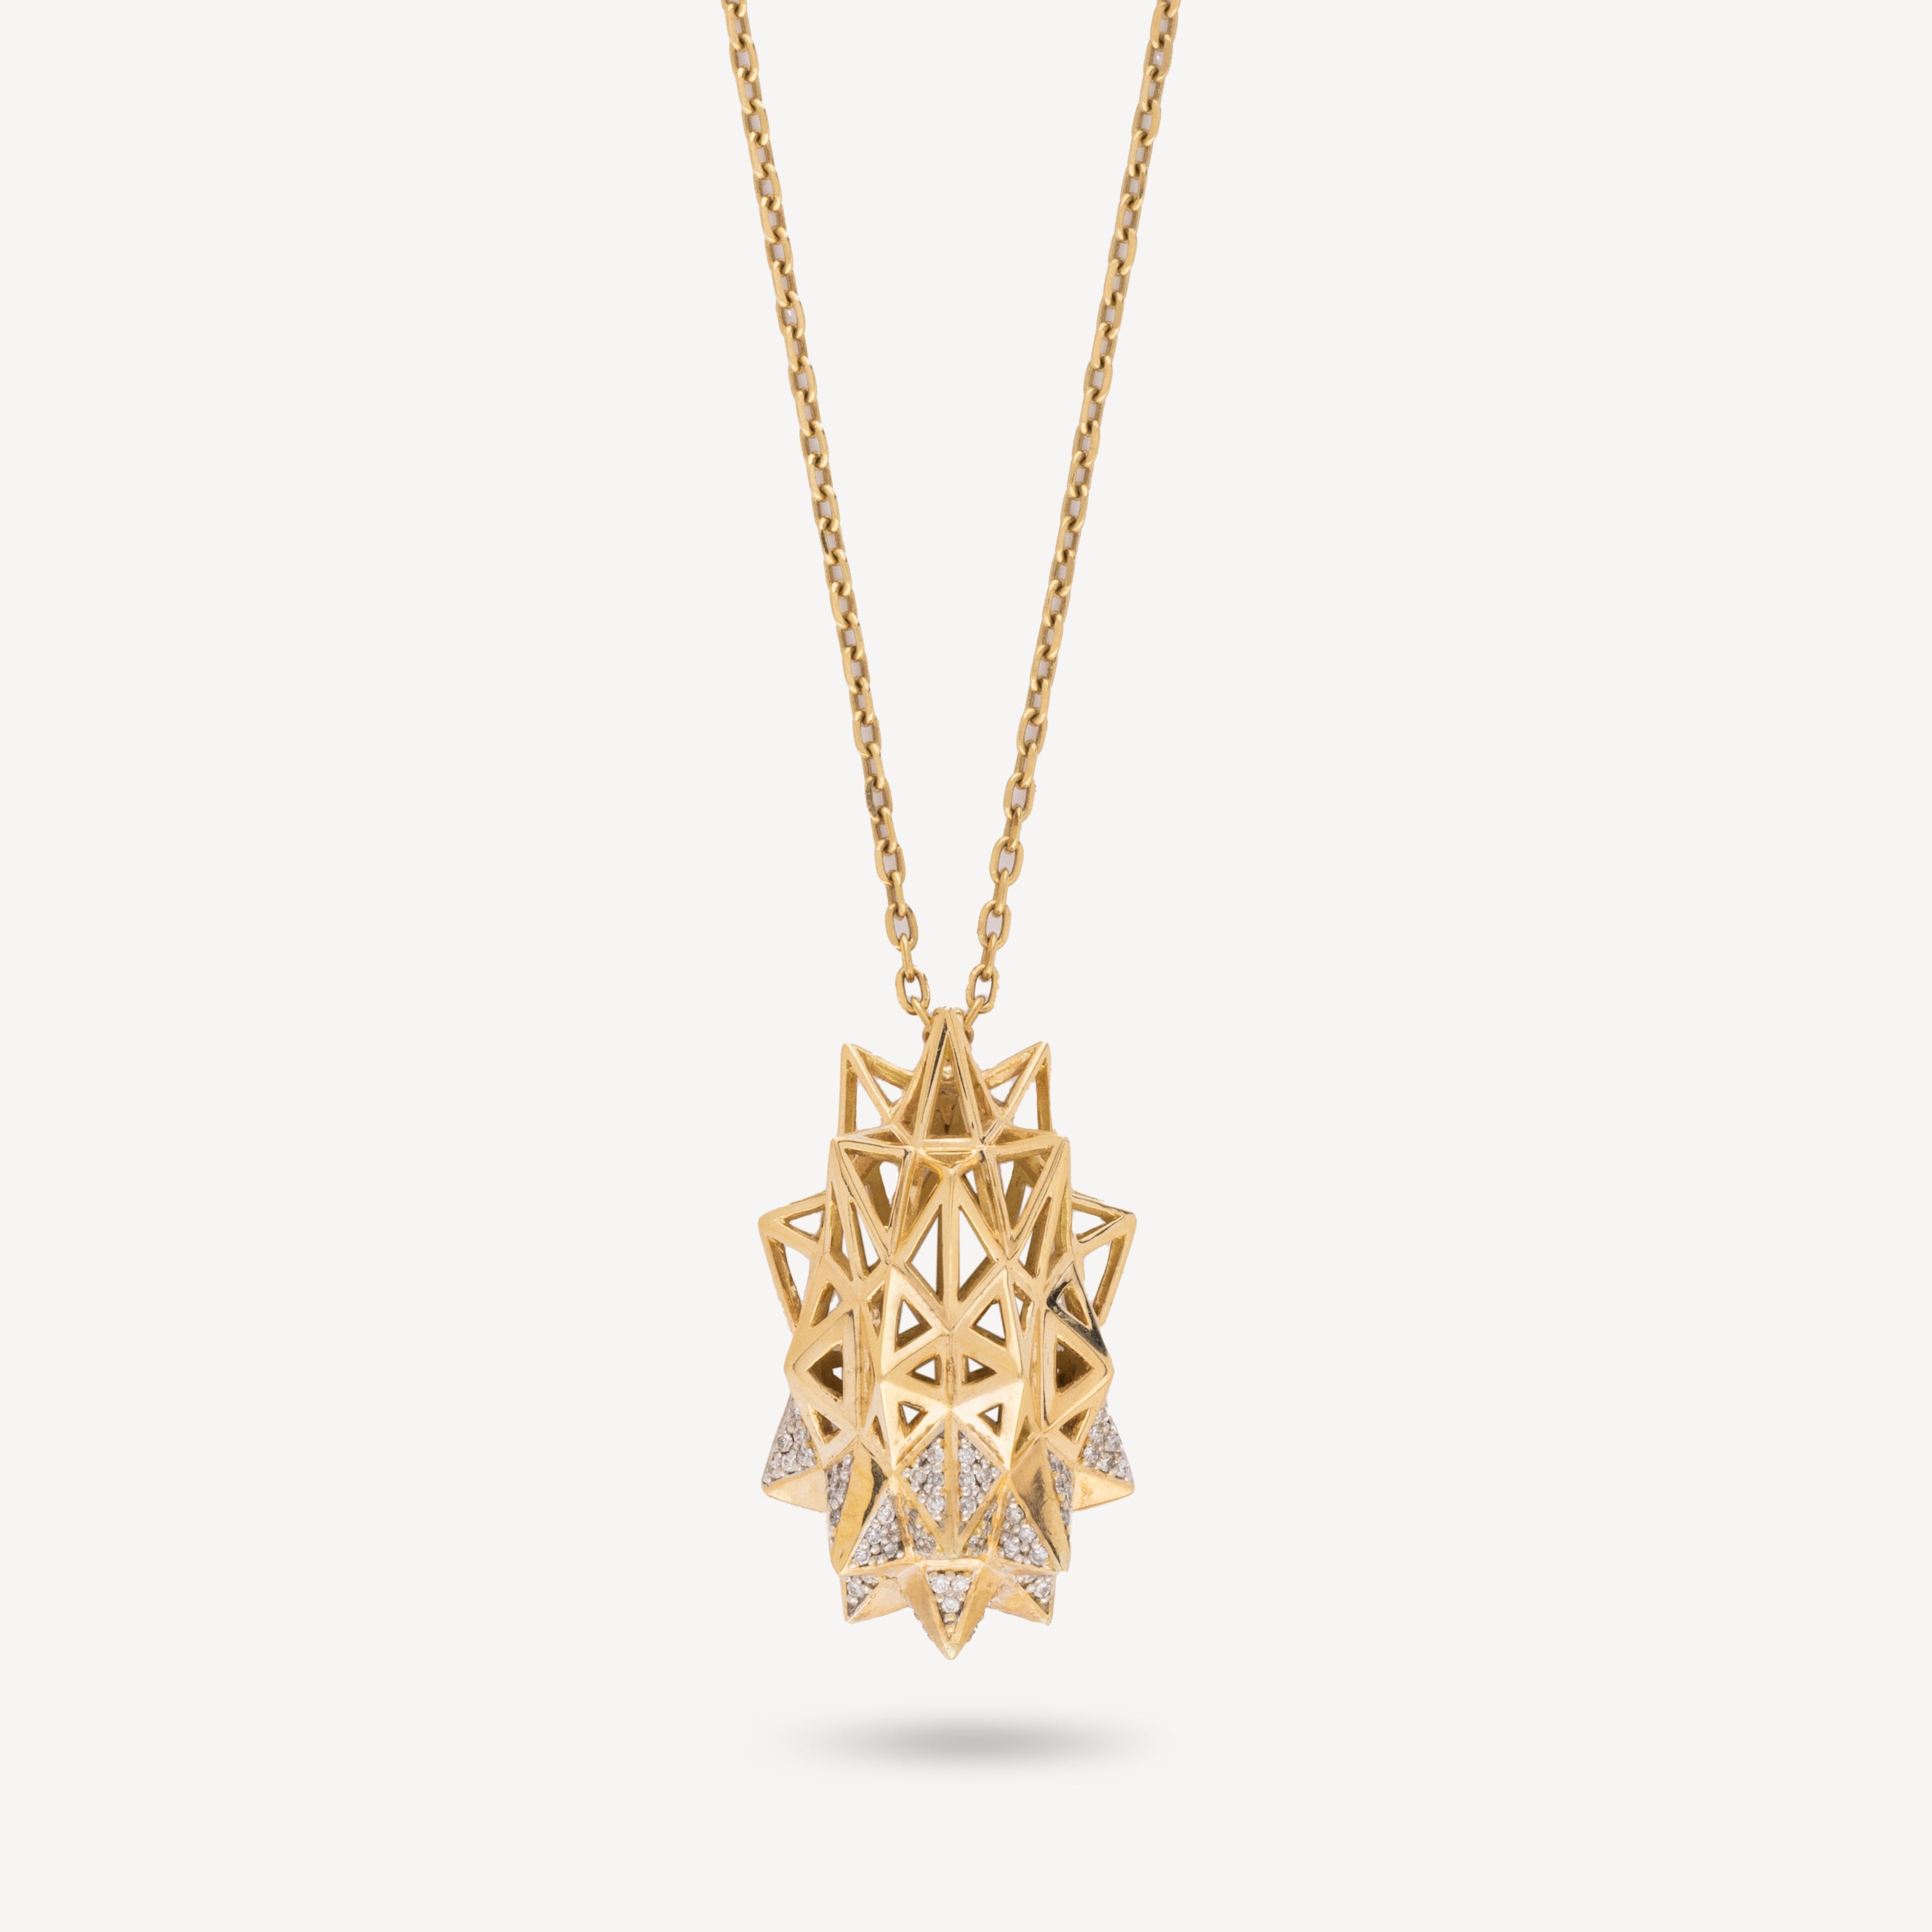 Flatback Necklace in Gold and Stellar Diamonds